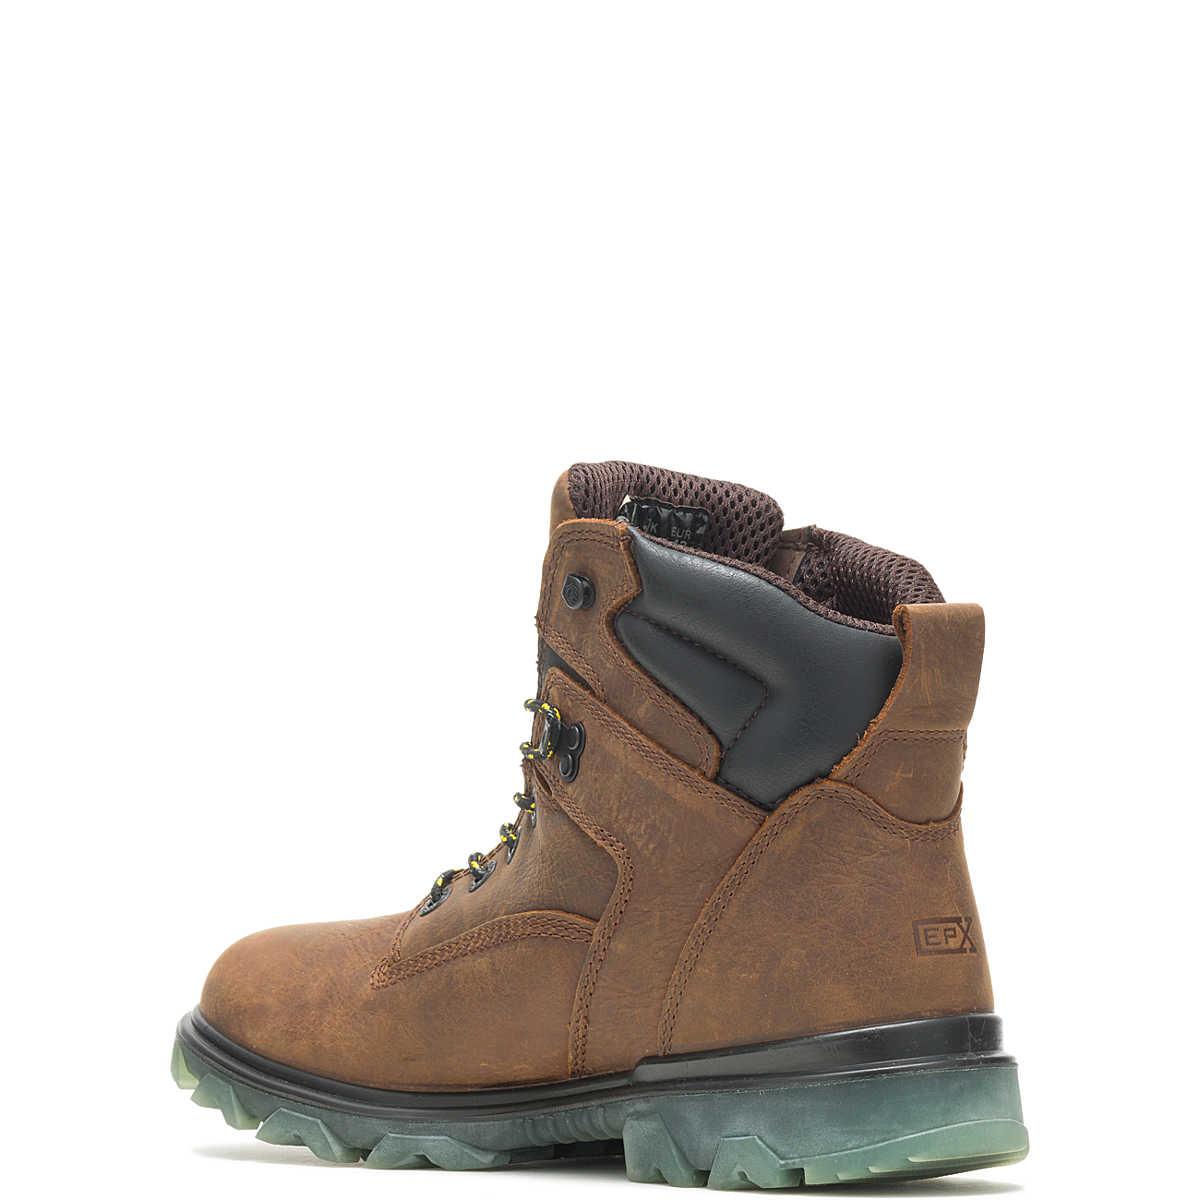 Men's I-90 EPX Carbonmax Work Boot - Brown - Purpose-Built / Home of the Trades